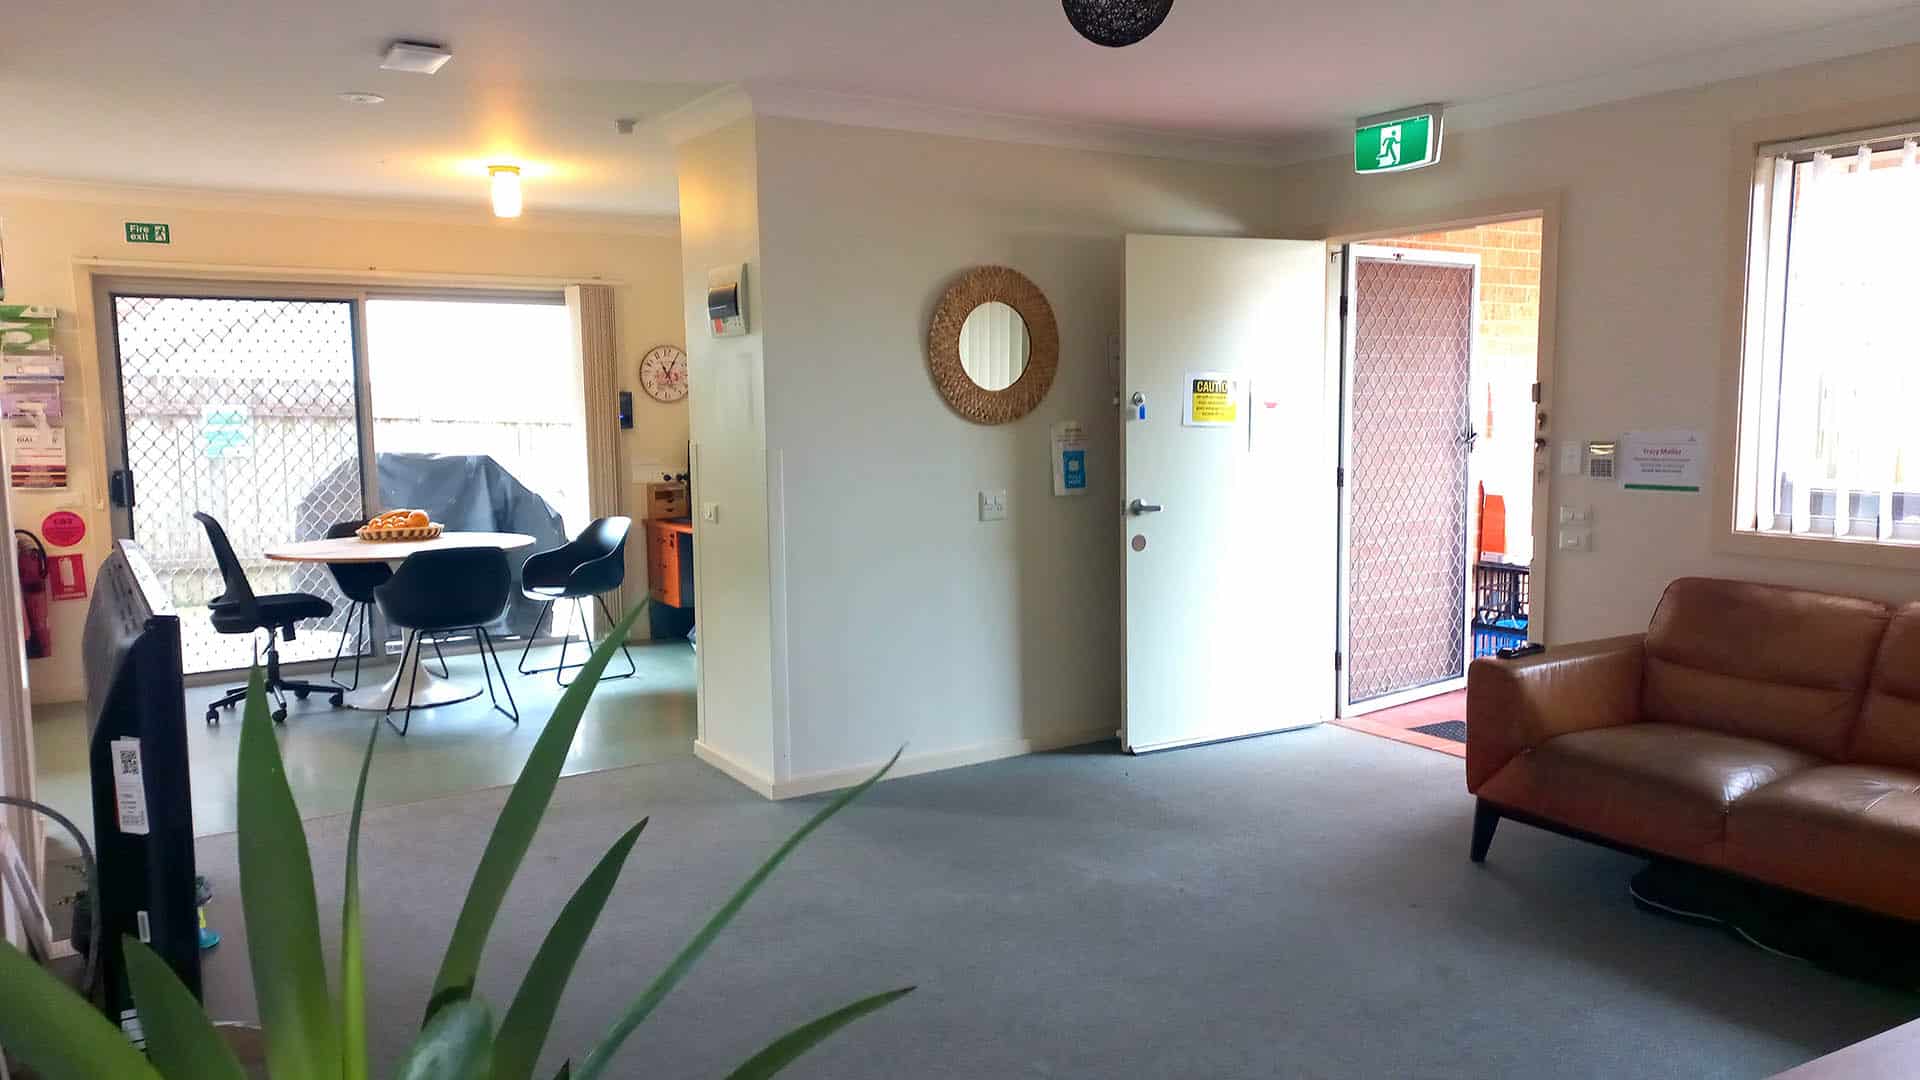 View of the entrance, living and dining areas.